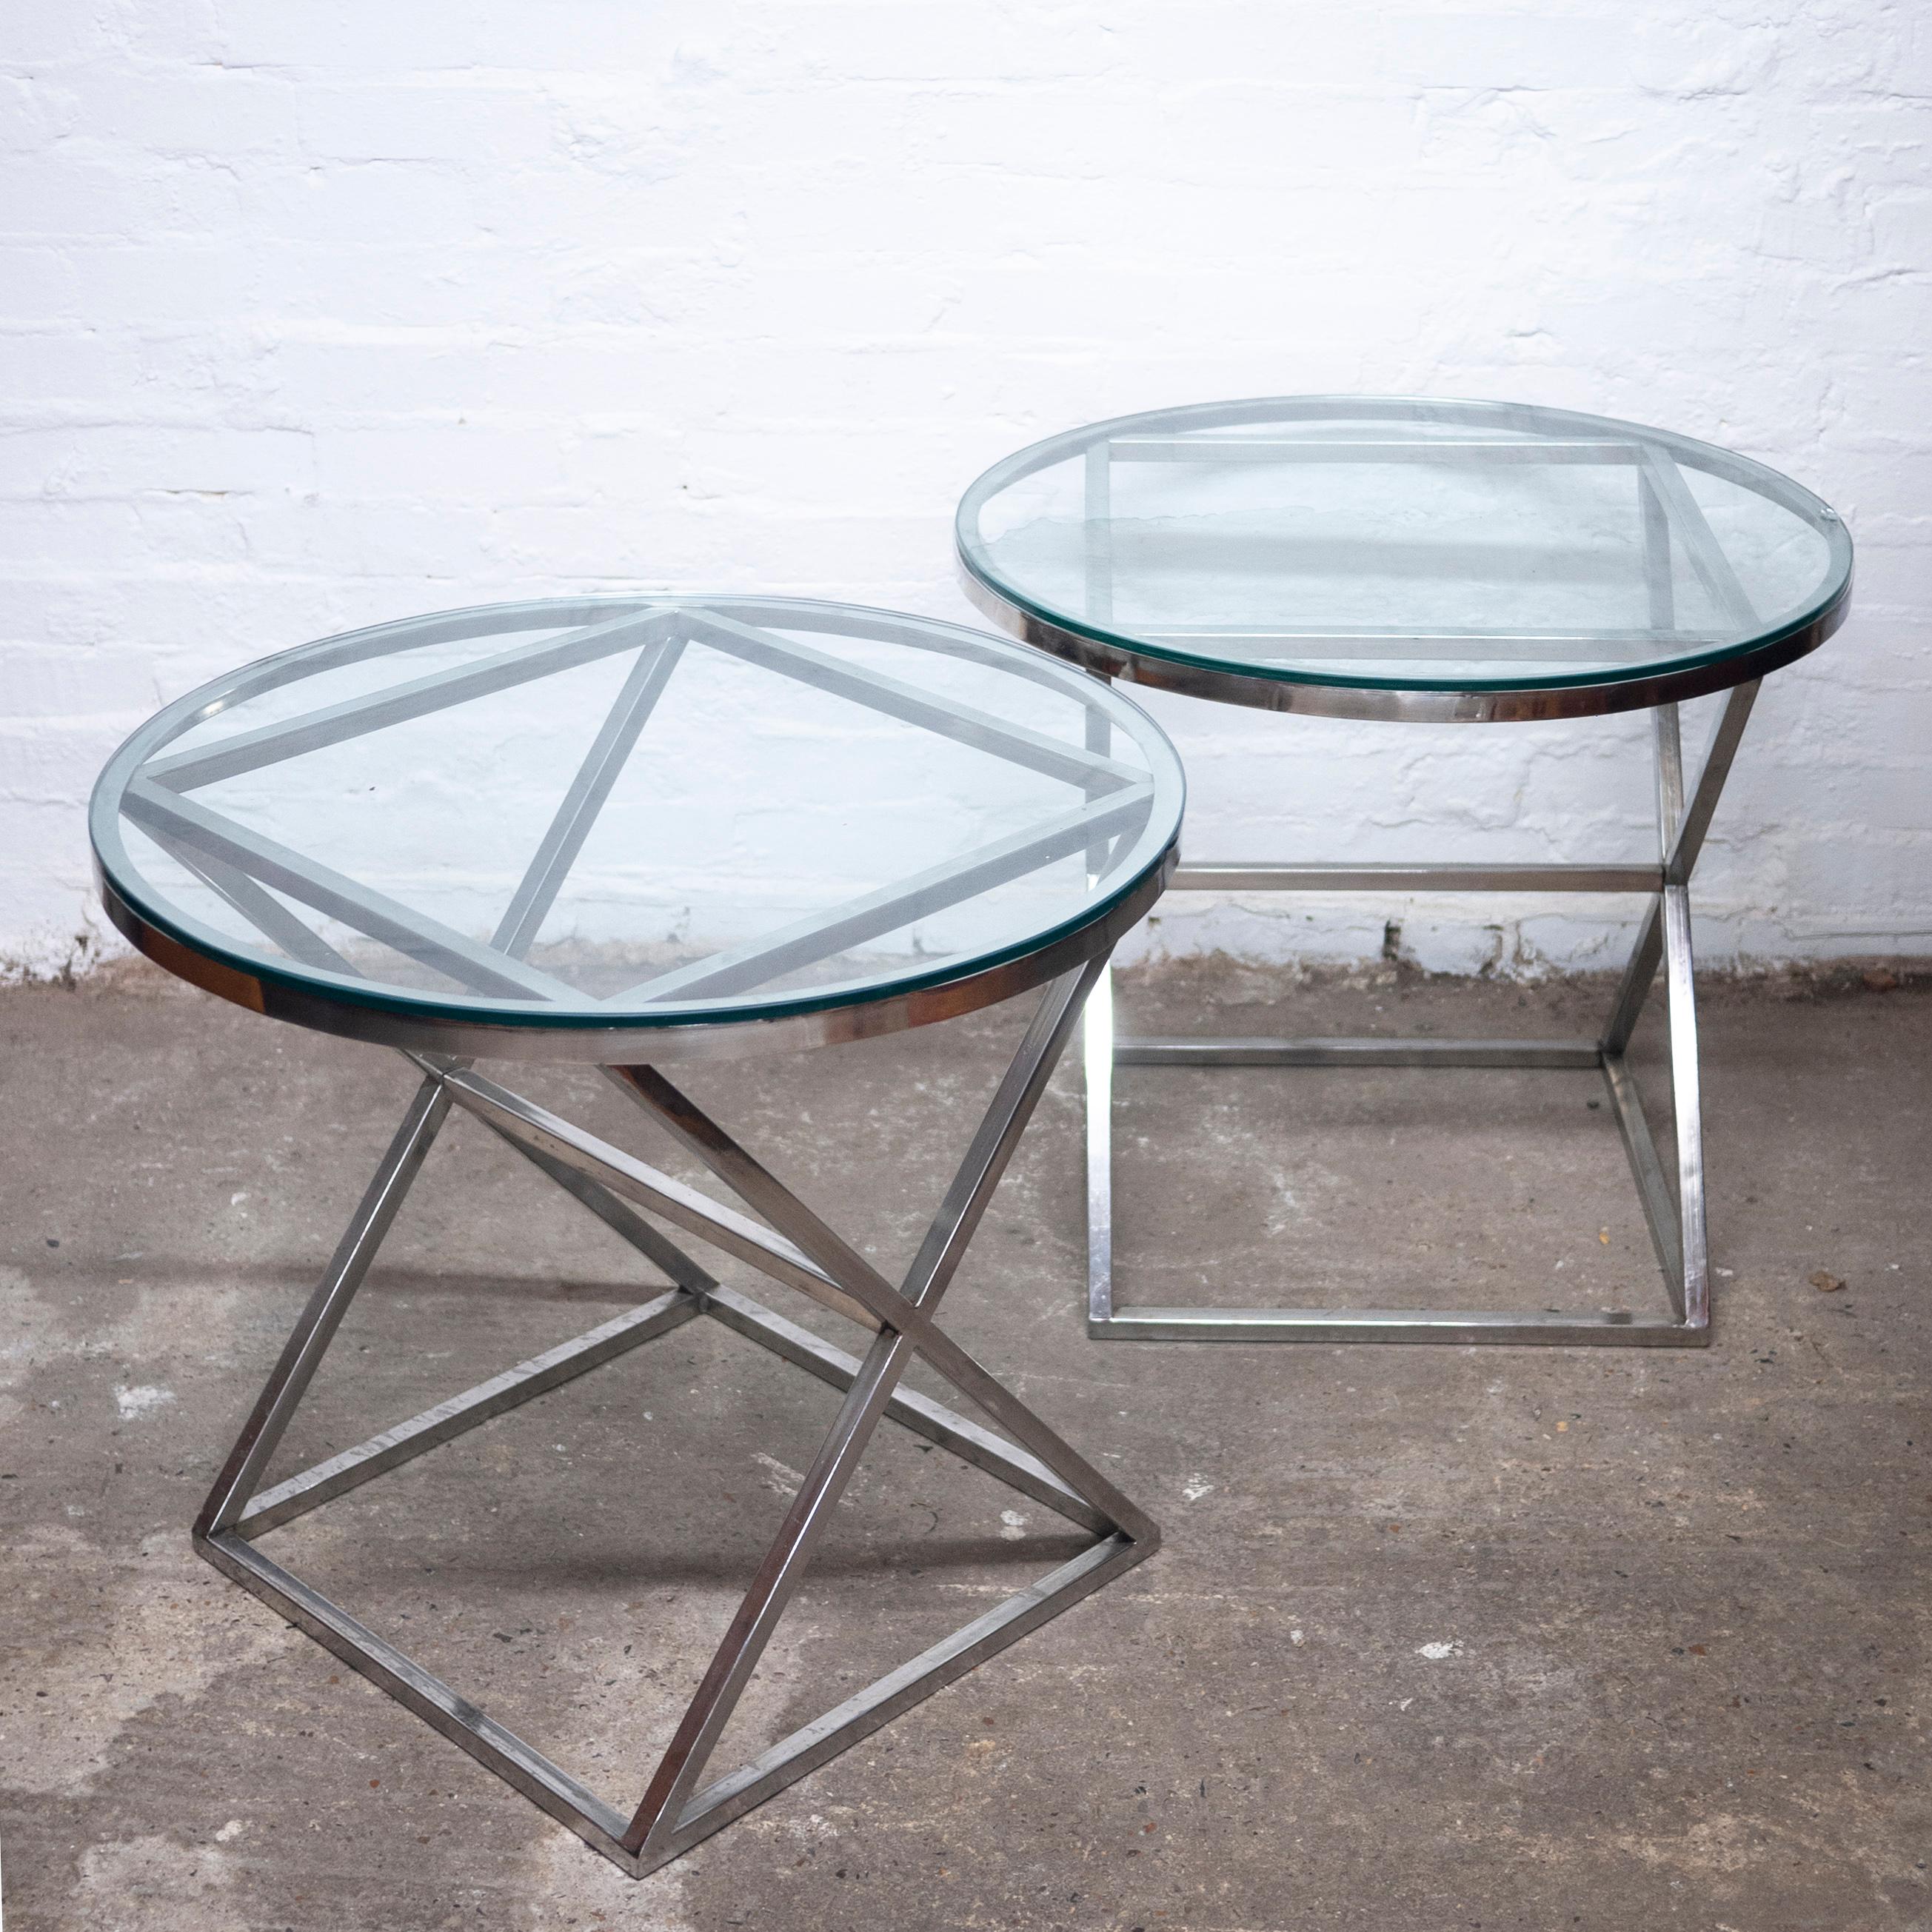 Pair of Round Glass and Chrome Side Tables by Casa Padrino, 1990s, Set of 2 For Sale 7